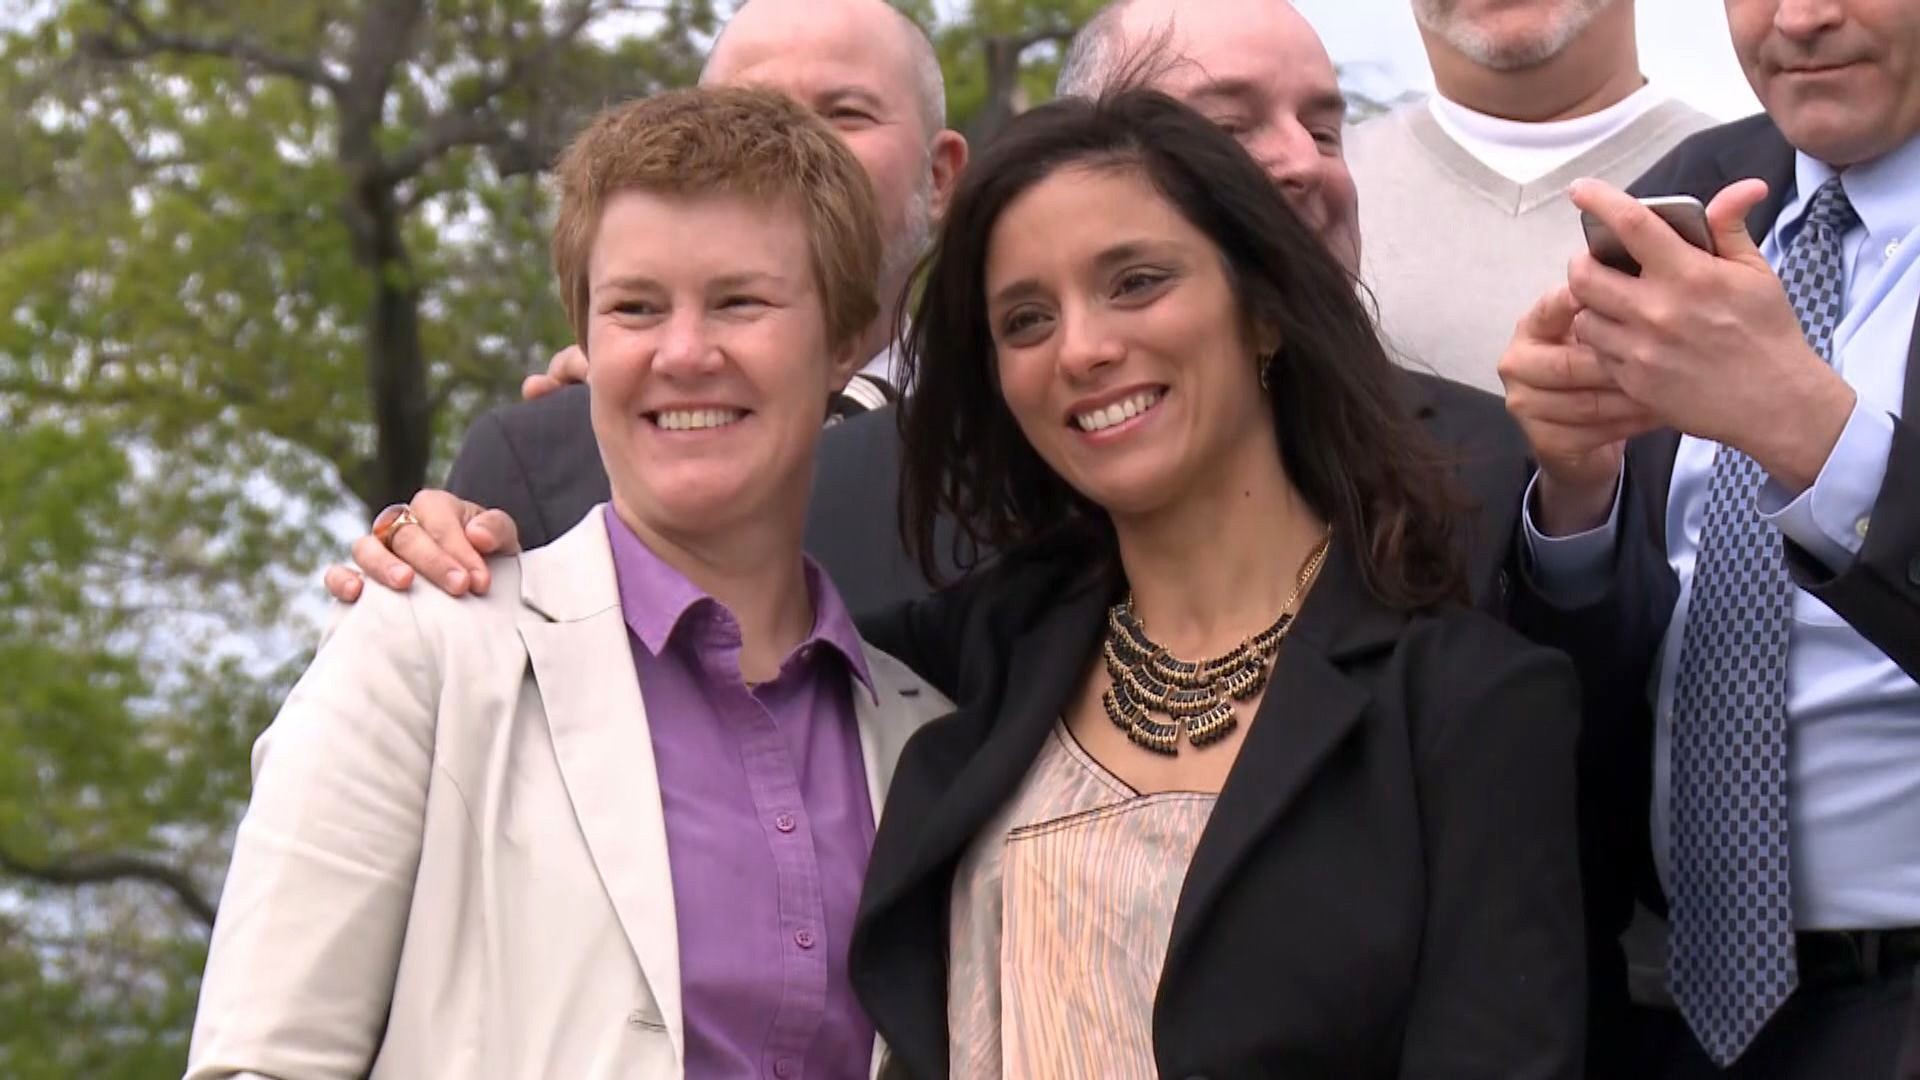 5 years of same-sex marriage Knoxville couple was key in landmark case wbir picture